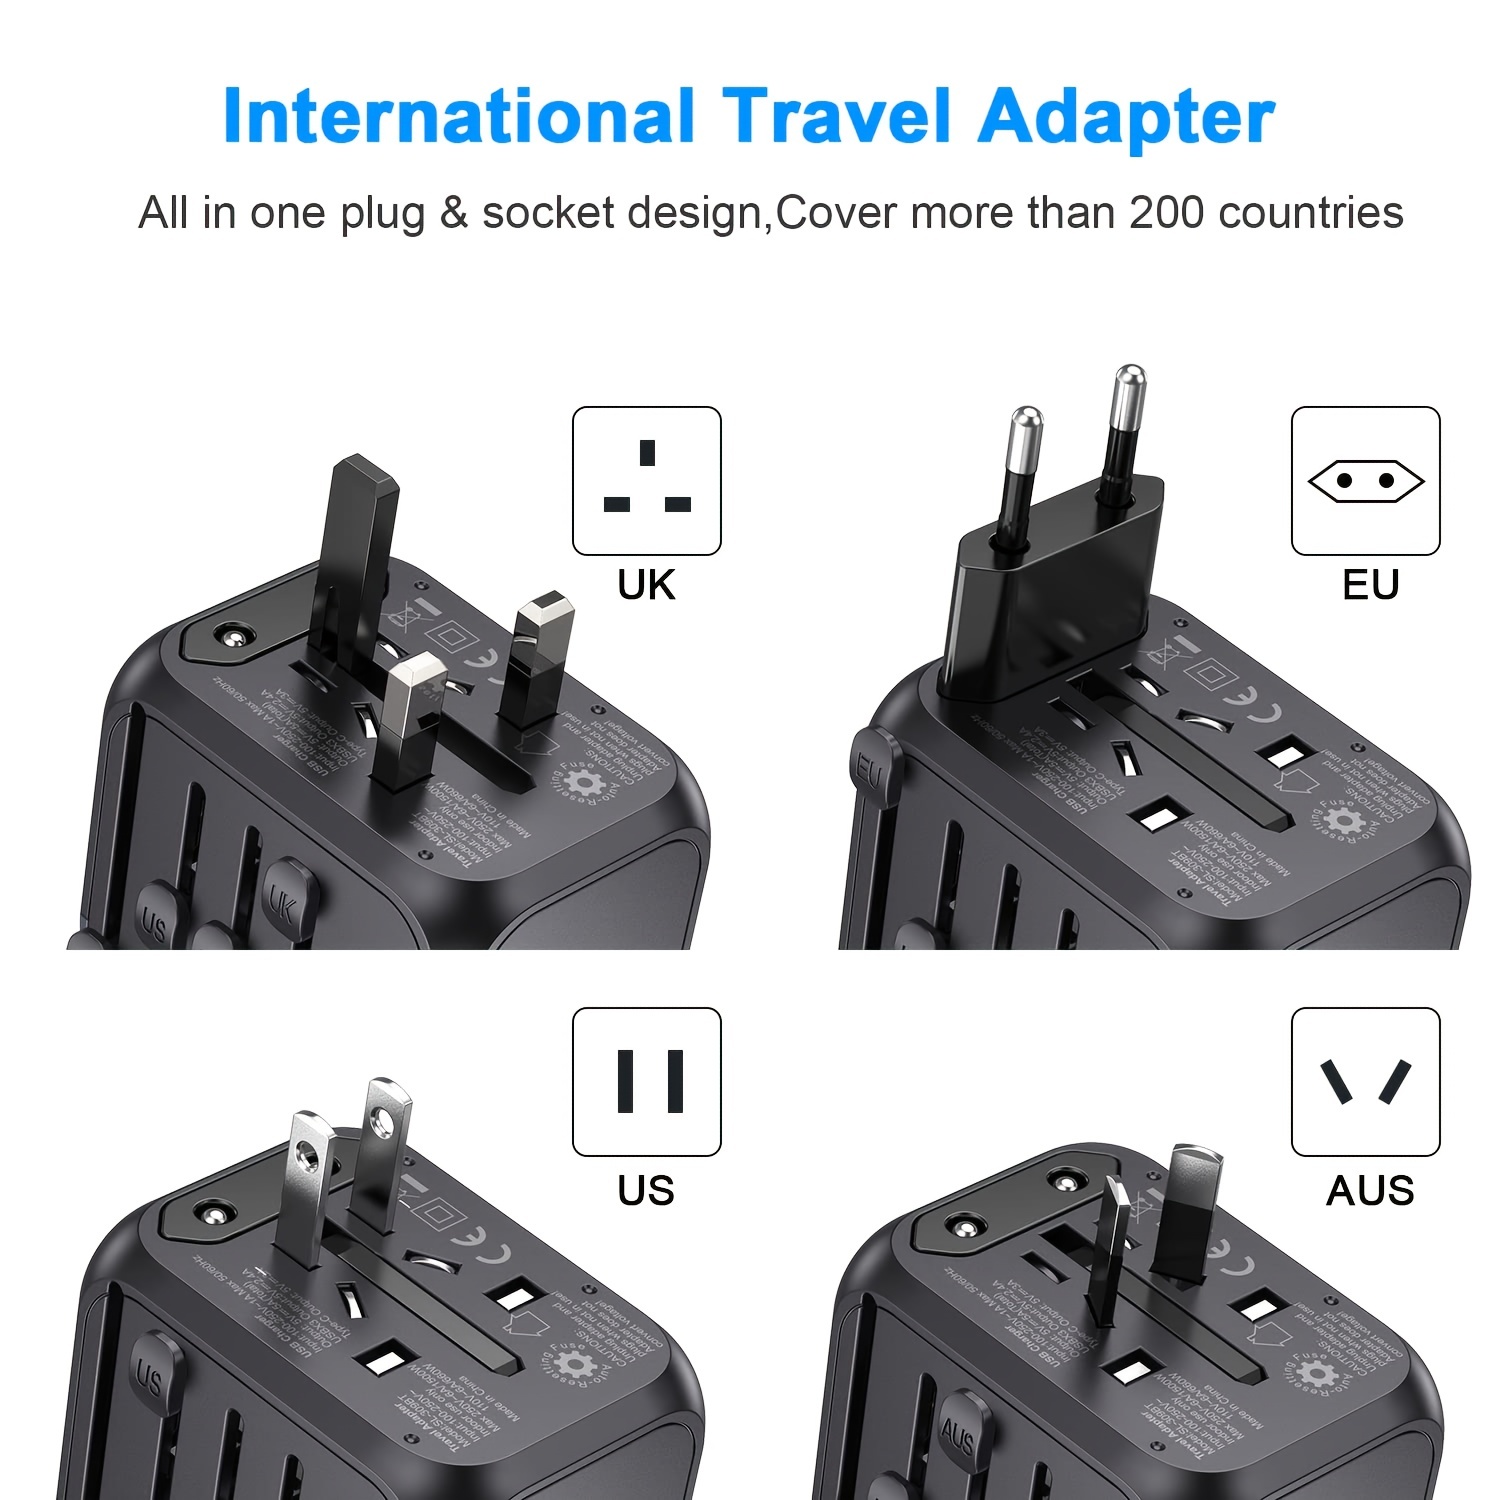 Ougrand Travel Plug Adapter, Universal Travel Adapter, Travel Power Plug Adapter, International Power Adapter with 3 USB & 1 Type-C Travel Accessories